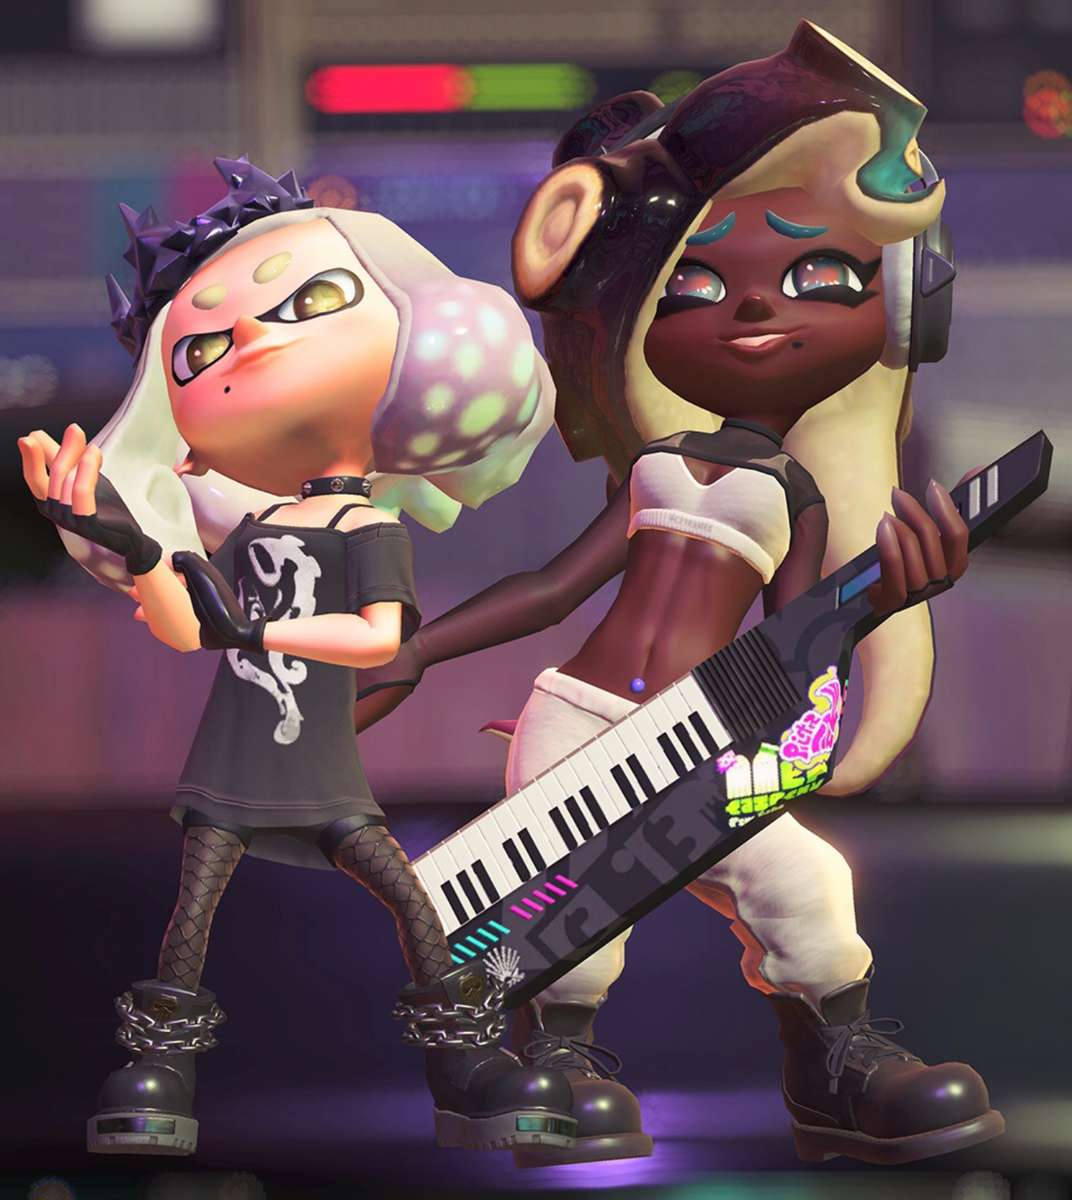 Off the Hook (kostýmy Springfest) ❤️❤️❤️ online puzzle